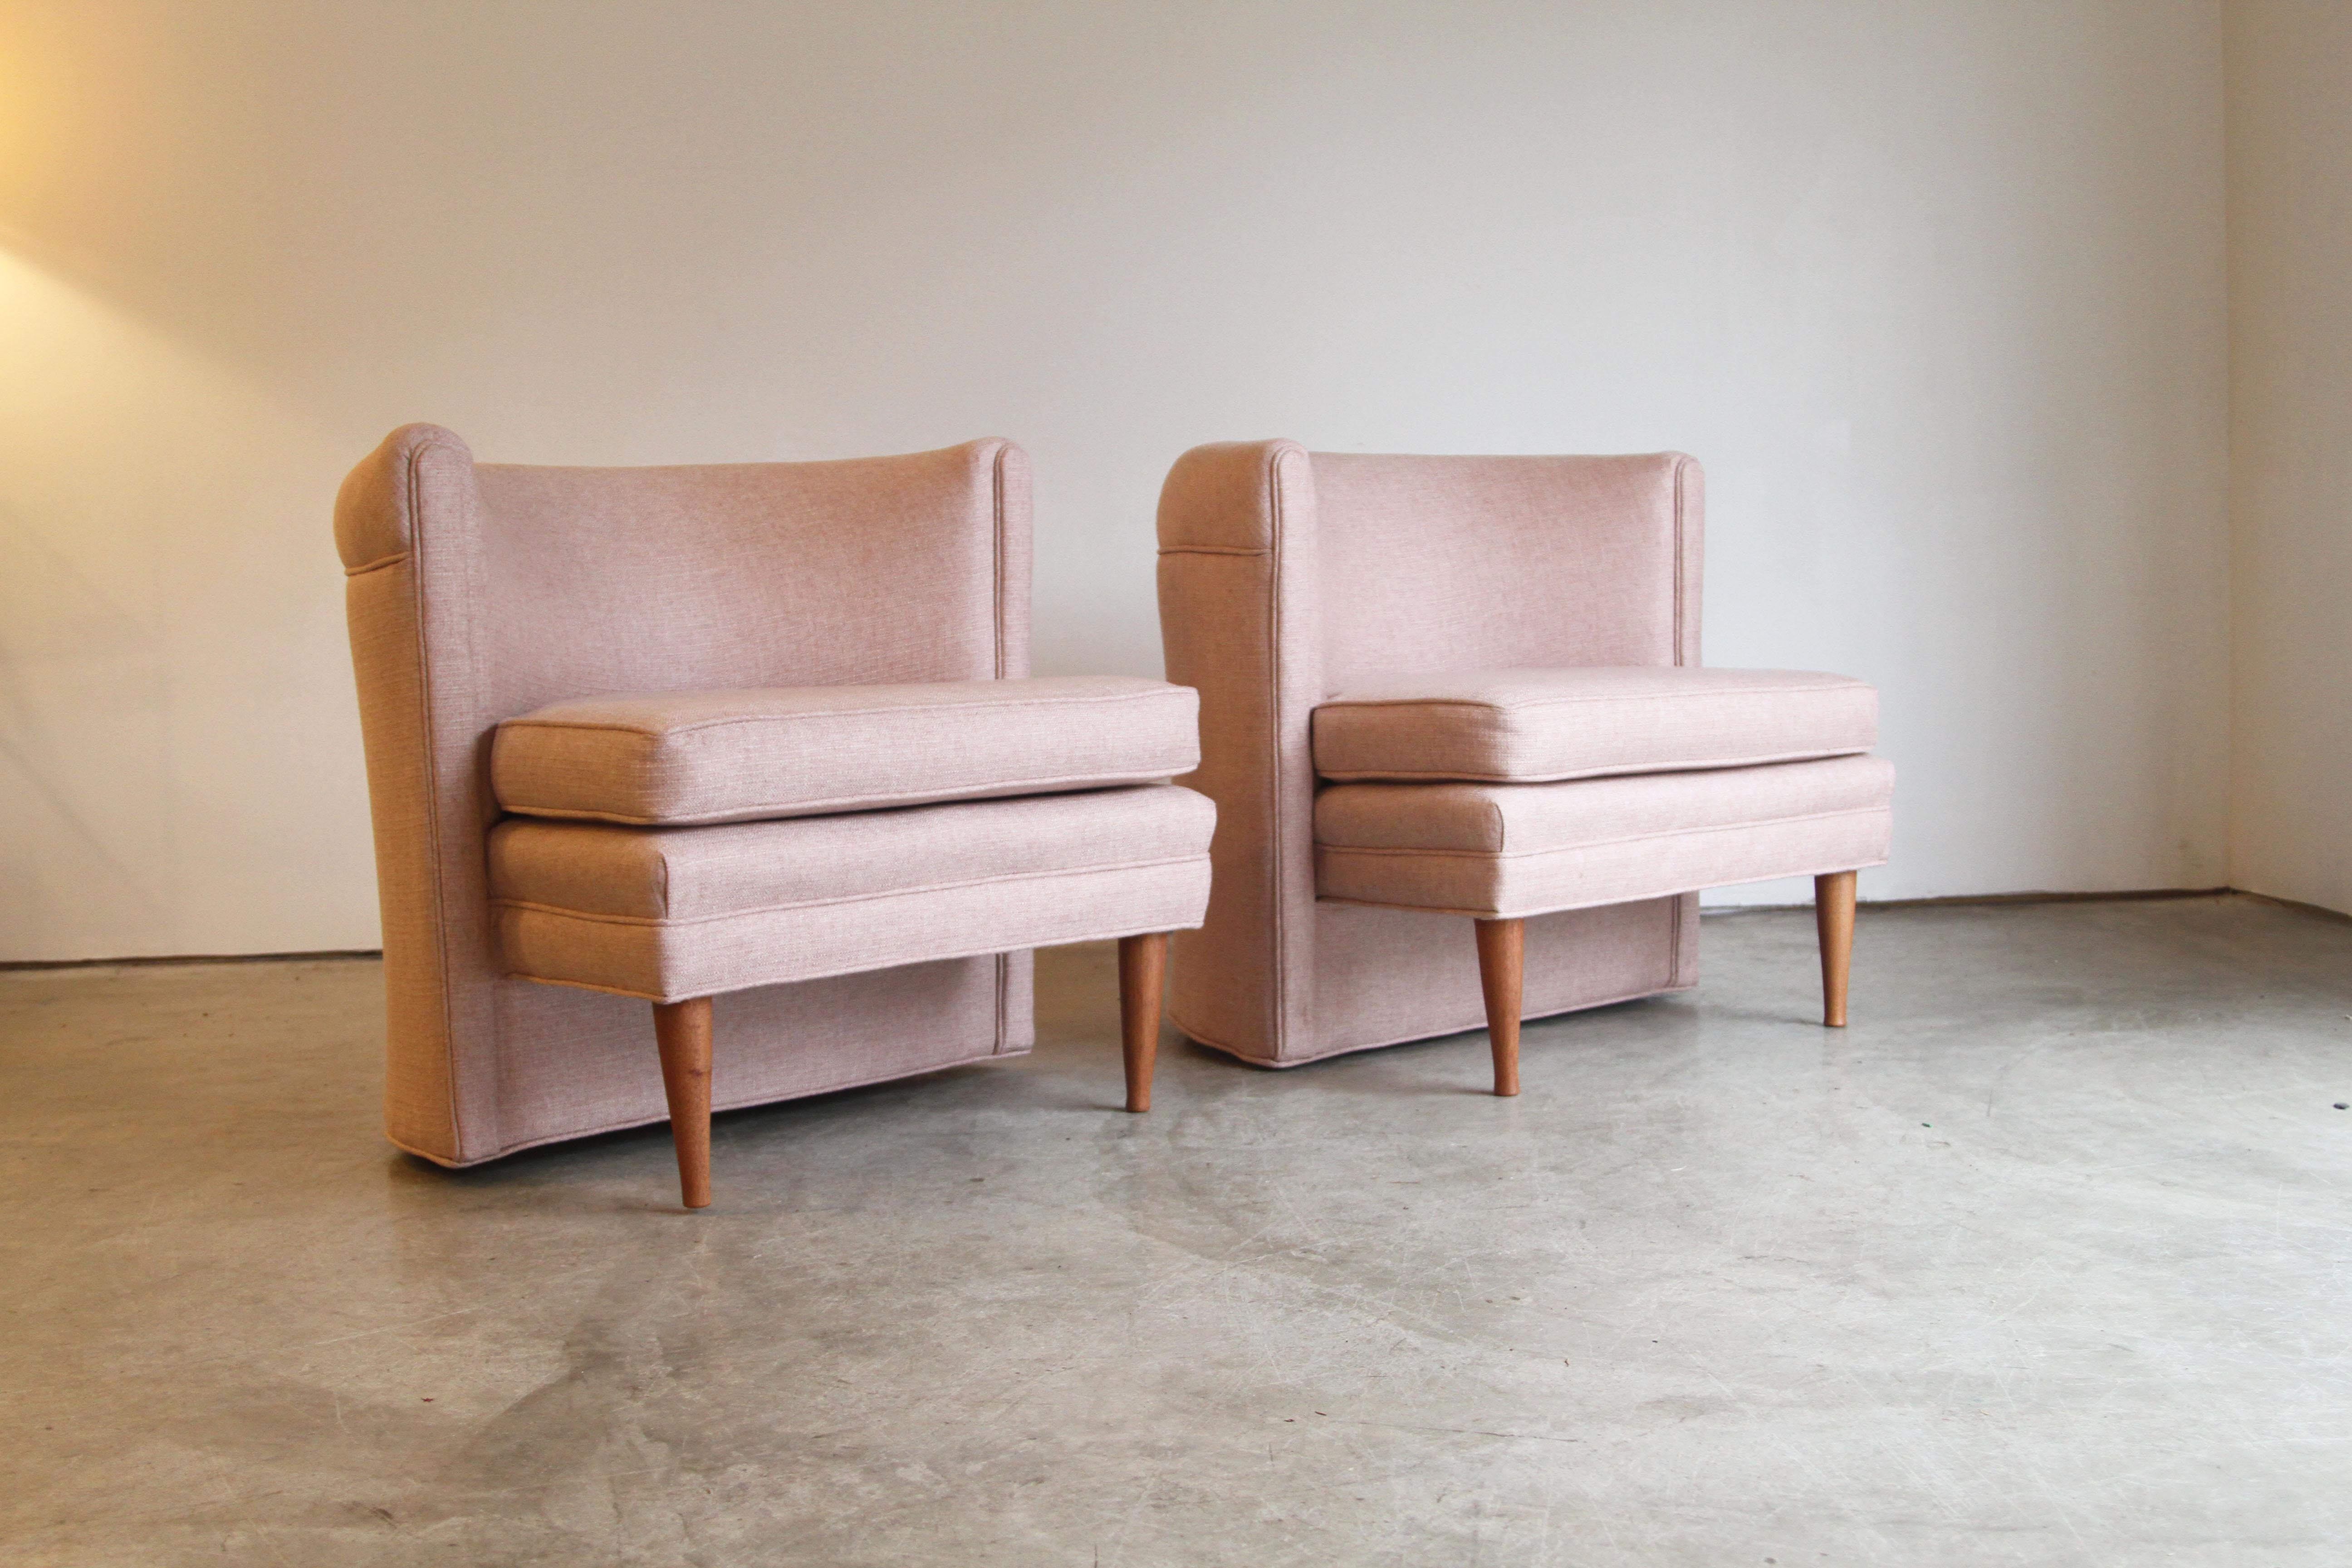 Designer: Unknown 
Manufacture: Unknown 
Period/style: Mid-Century Modern 
Country: US 
Date: 1950s

Newly made legs.